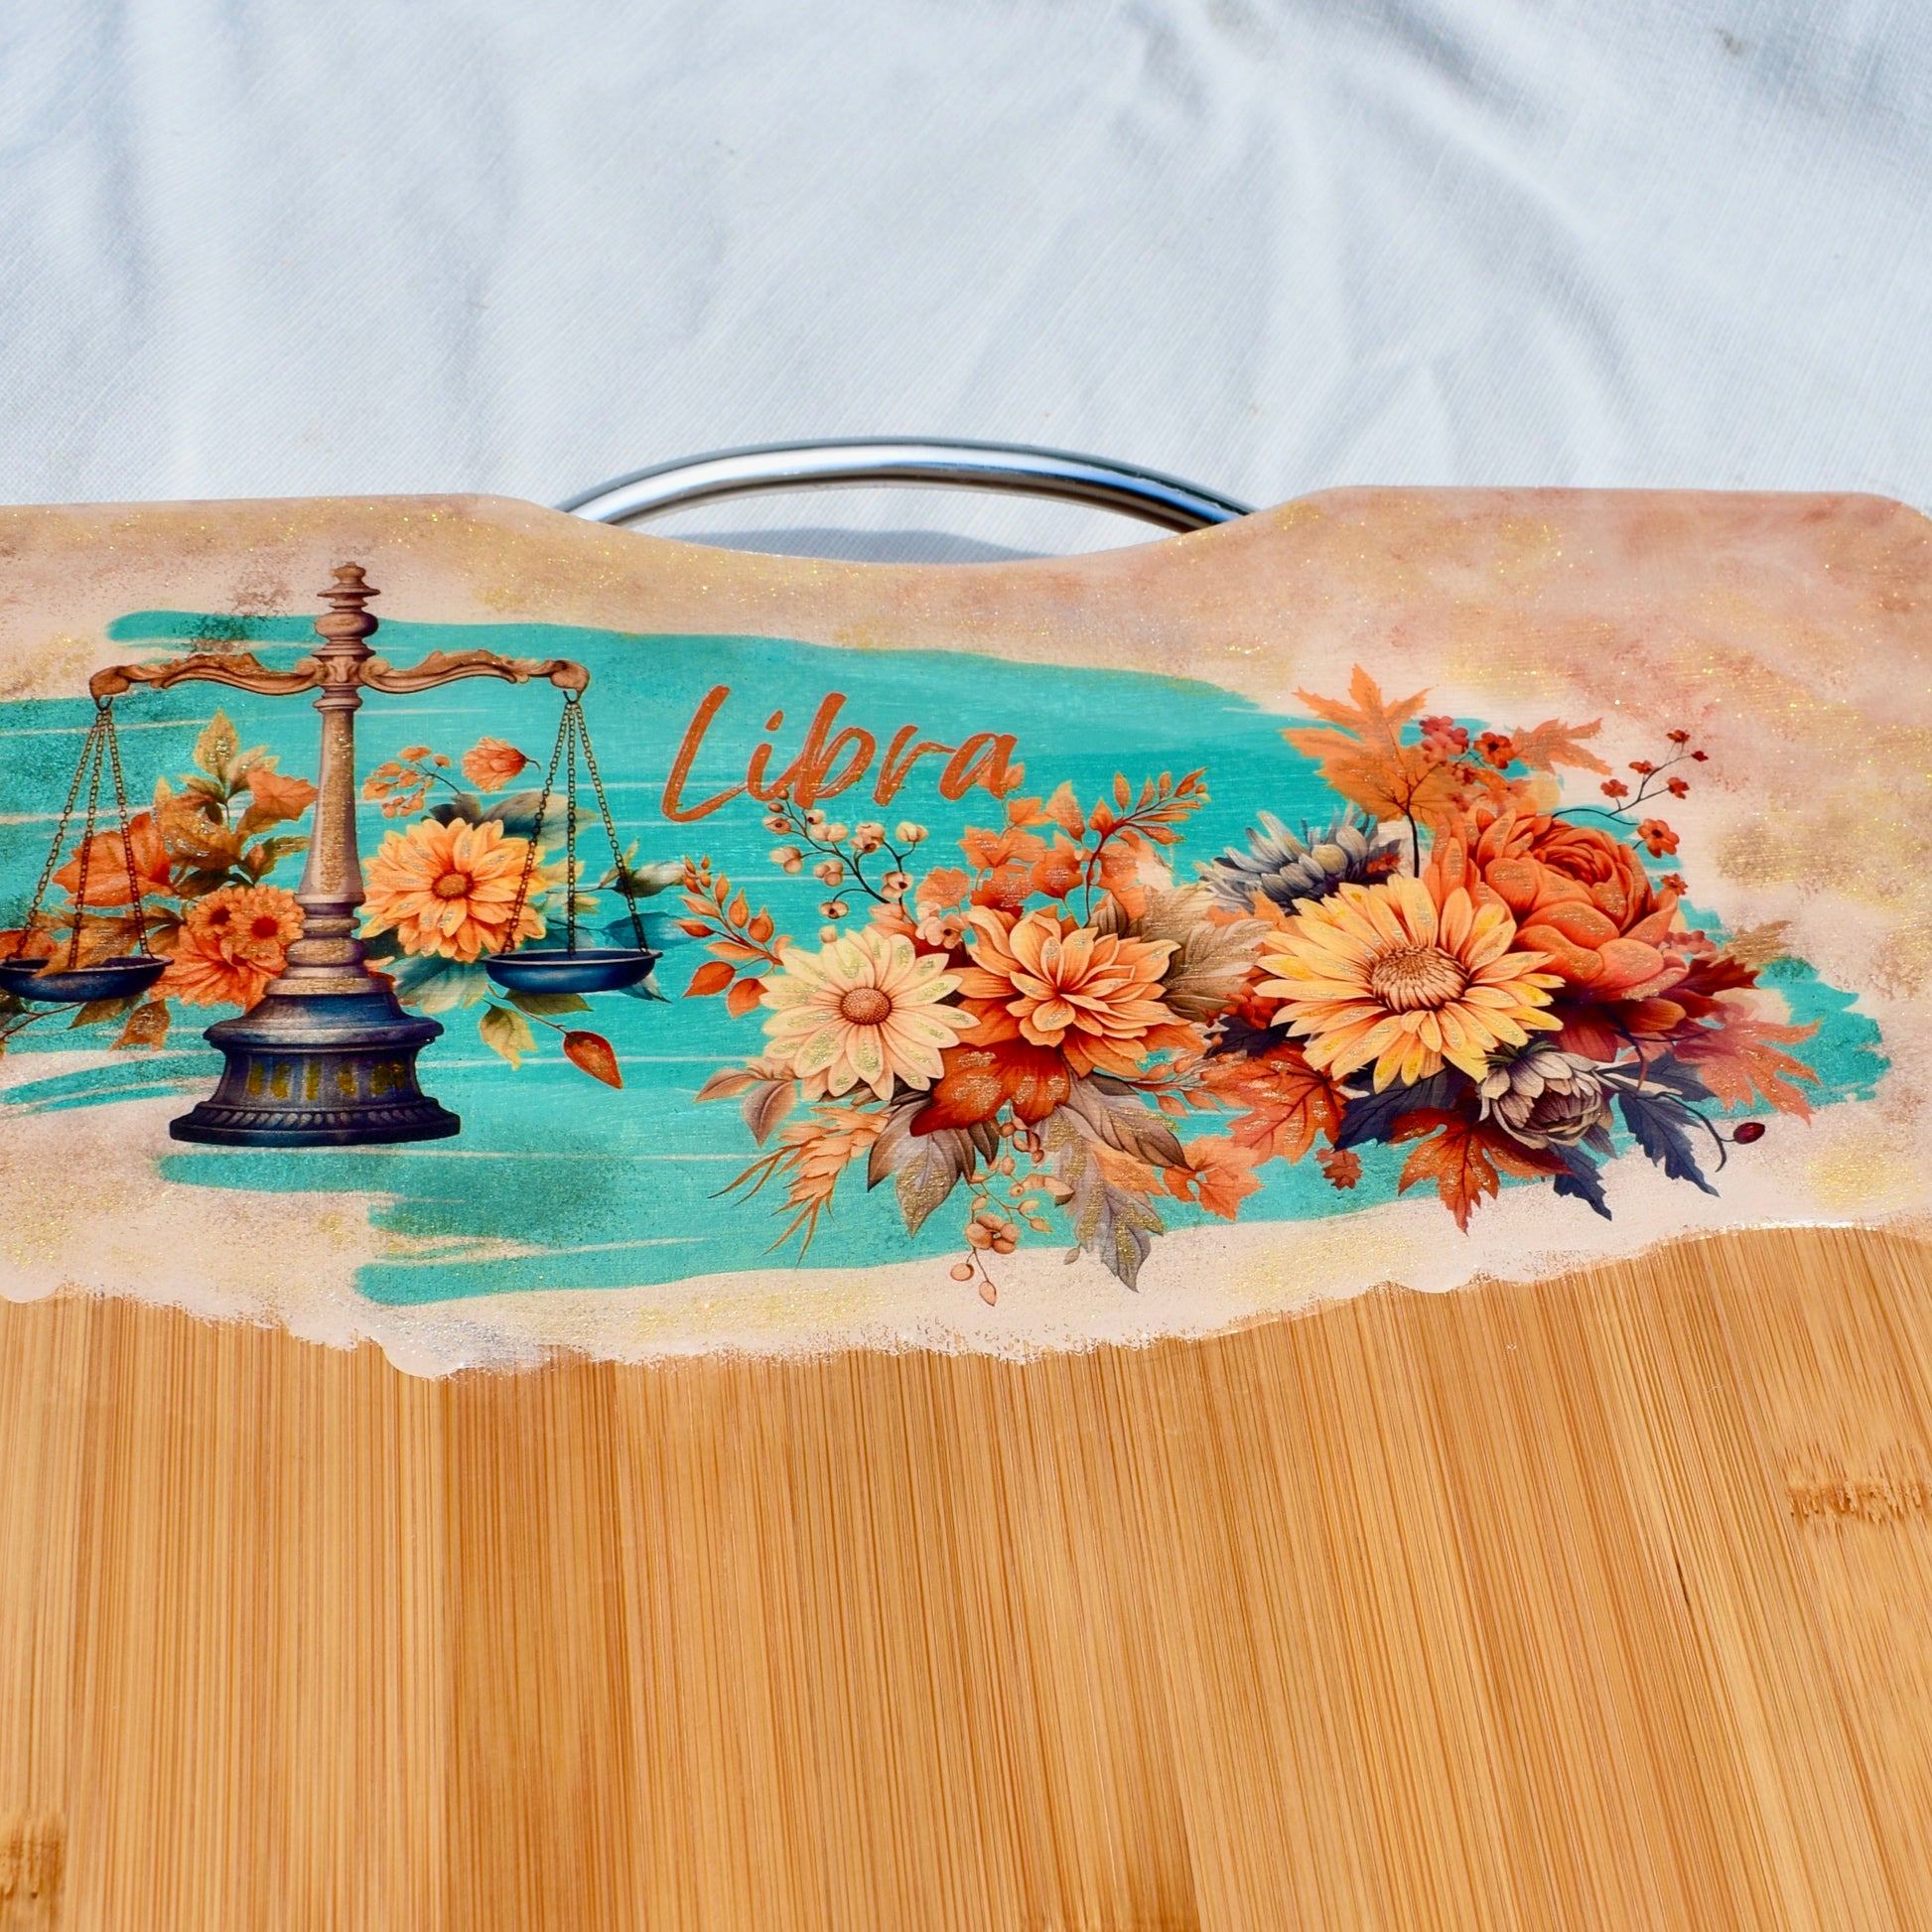 Custom Bamboo Cheese Board with Sunflower Design - easel included